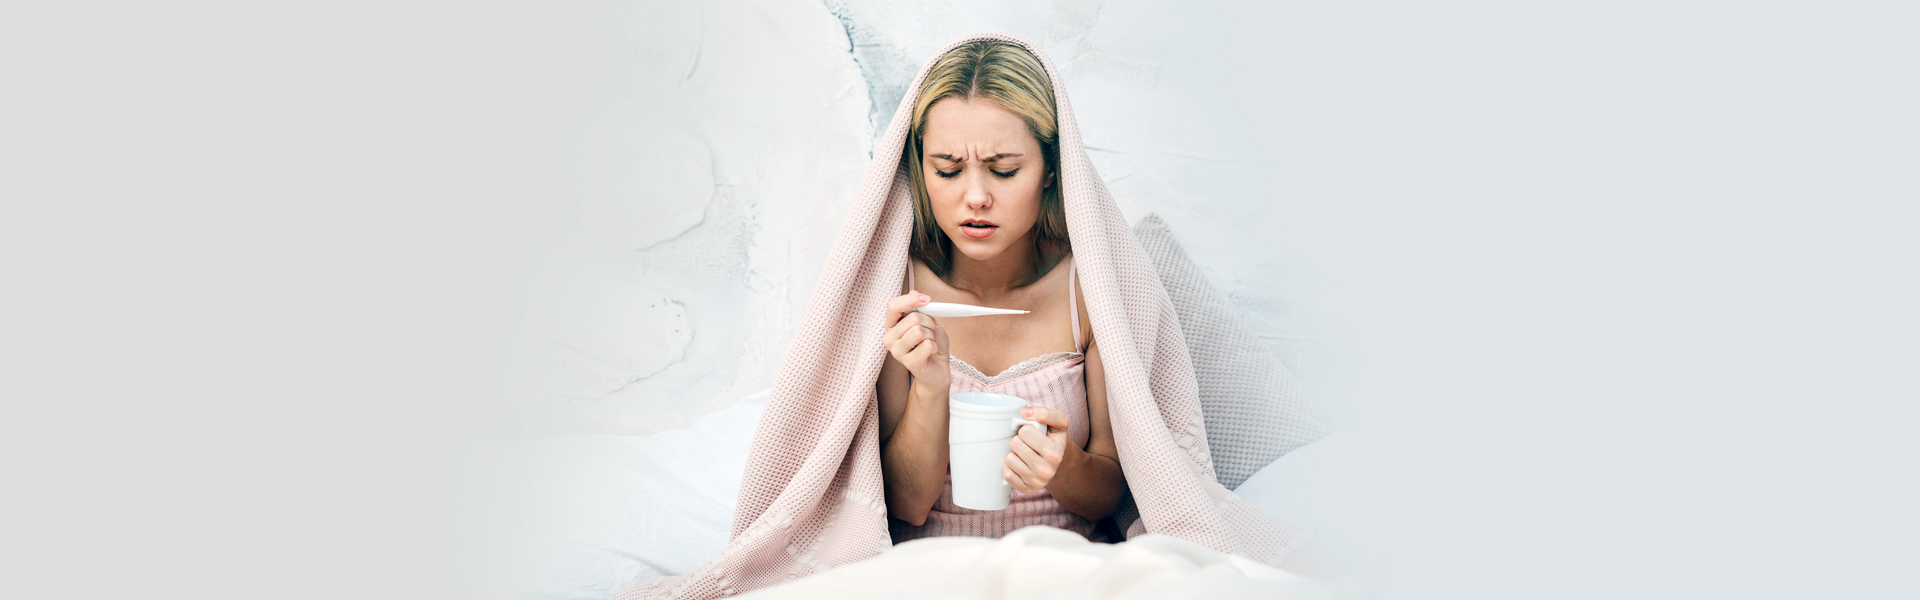 An Overview of the Types, Causes, and Treatment Alternatives for a Fever